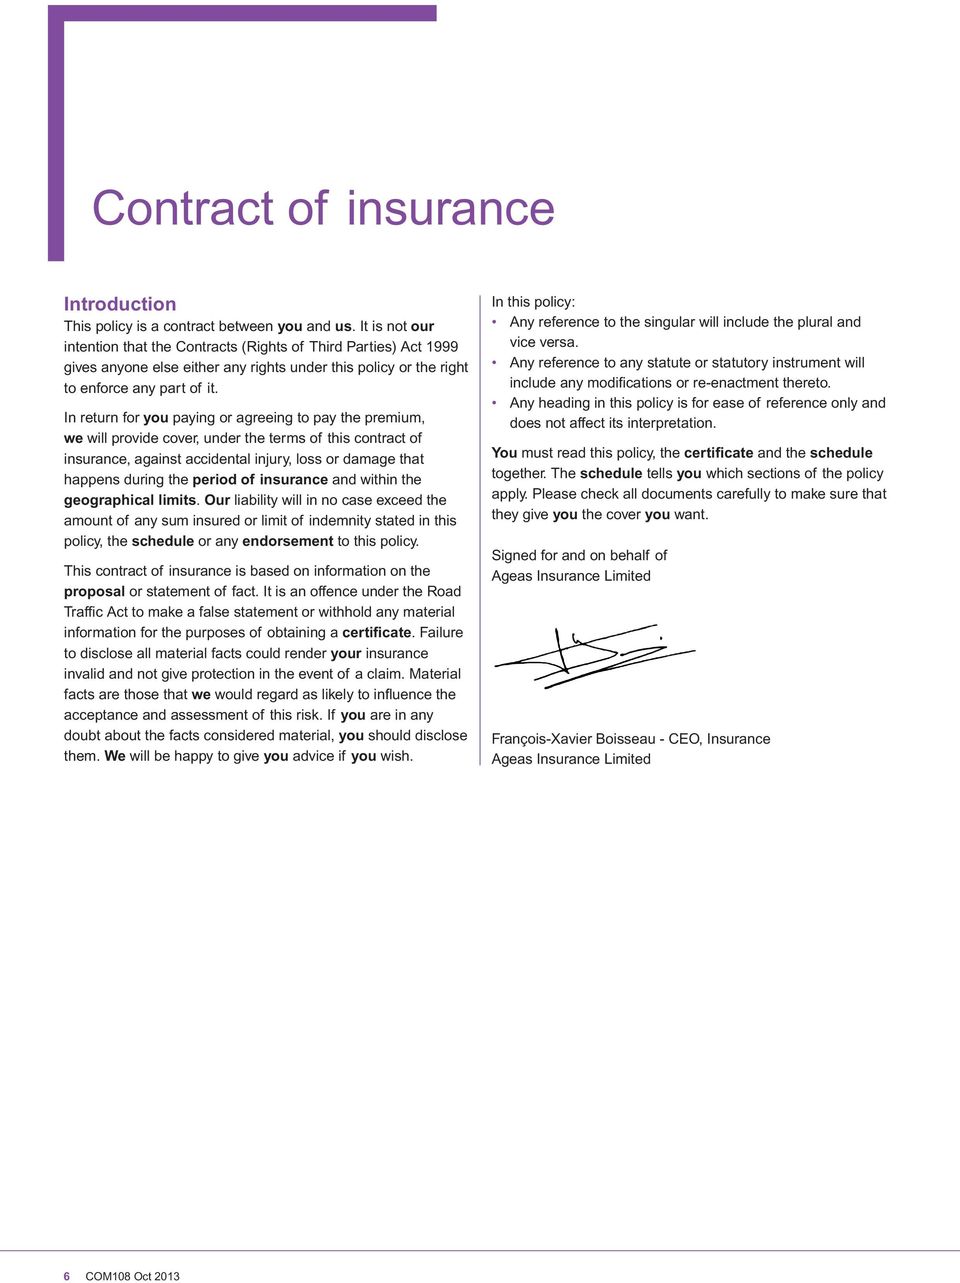 In return for you paying or agreeing to pay the premium, we will provide cover, under the terms of this contract of insurance, against accidental injury, loss or damage that happens during the period